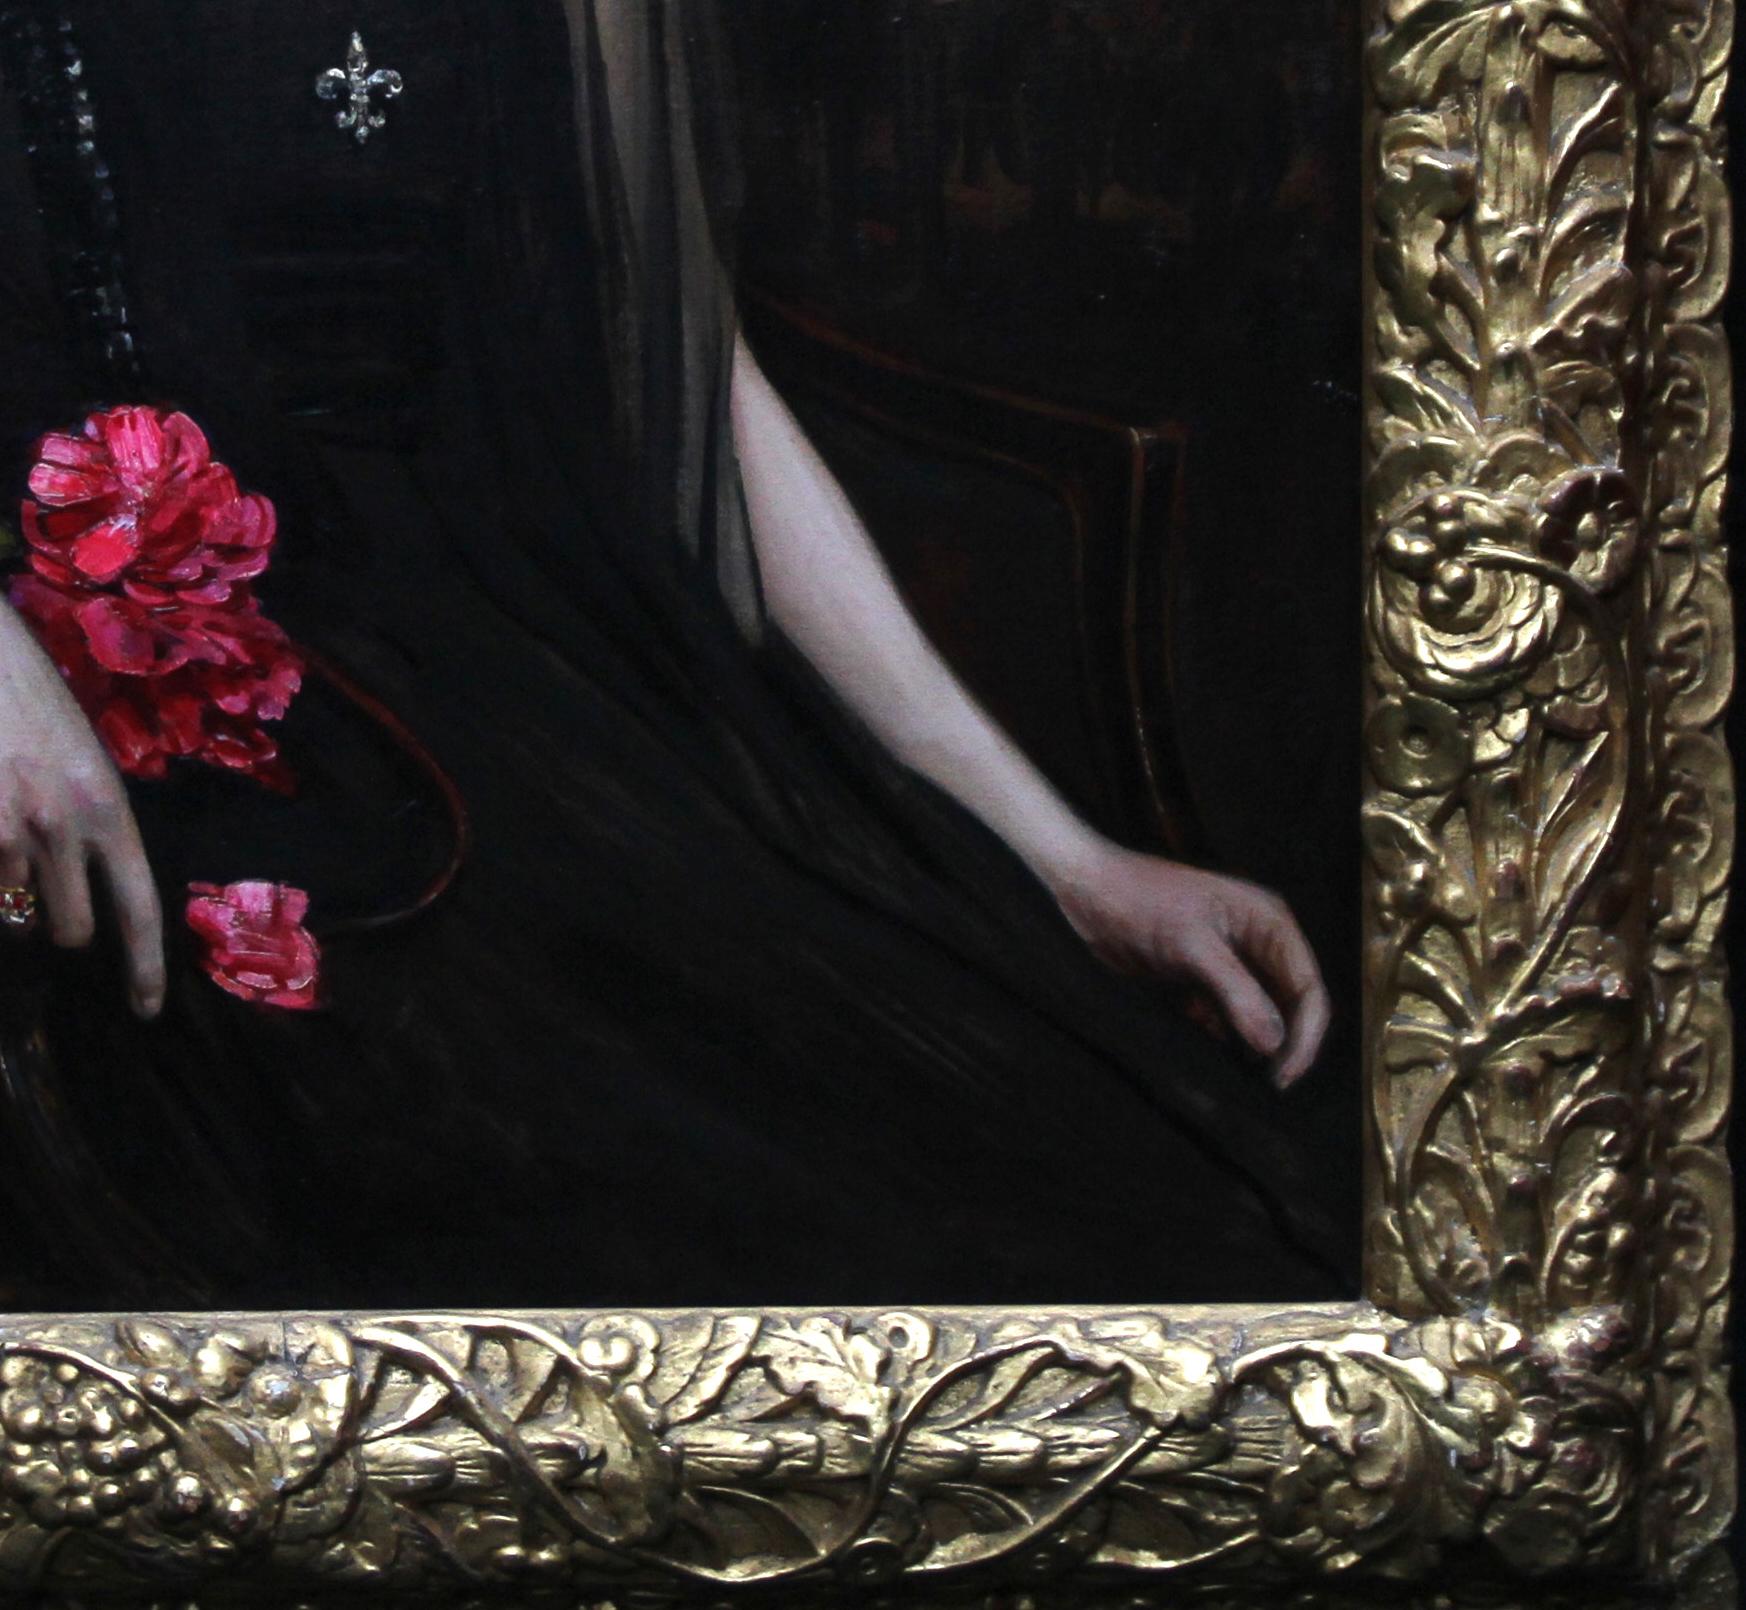 This stunning British Edwardian portrairt oil painting is by noted 19th century born portrait painter Ralph Peacock .Painted circa 1900 it is a seated portrait of a lady in a black dress with shiffon sleeves and beautiful pink flowers in her lap.